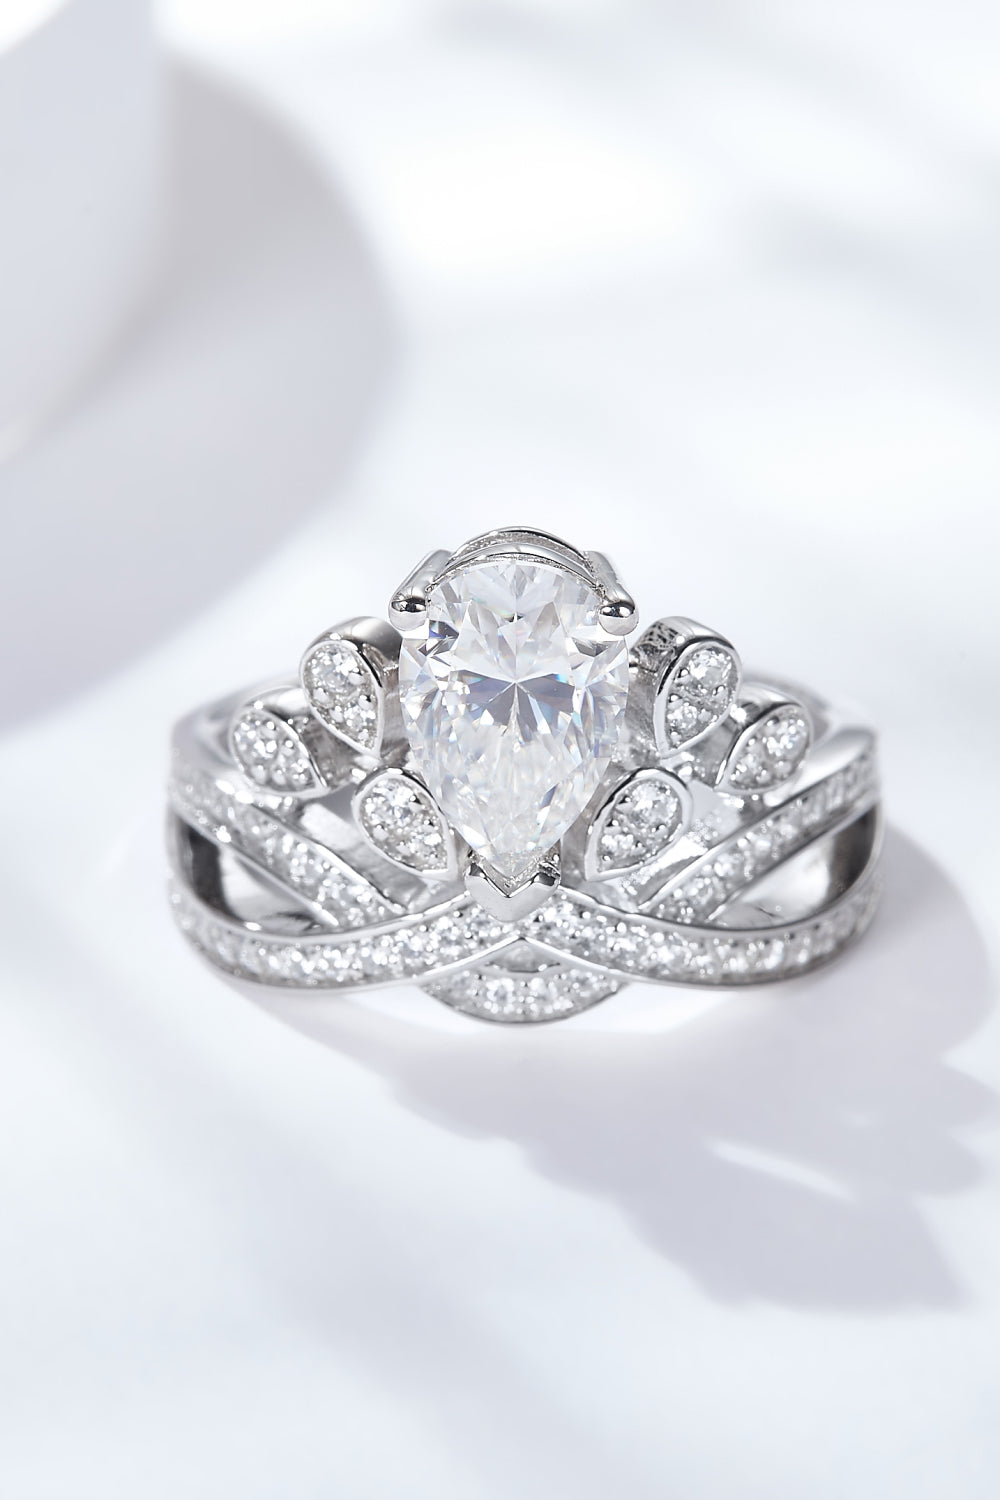 1.5 Carat Moissanite Crown-Shaped Ring-Rings-Inspired by Justeen-Women's Clothing Boutique in Chicago, Illinois